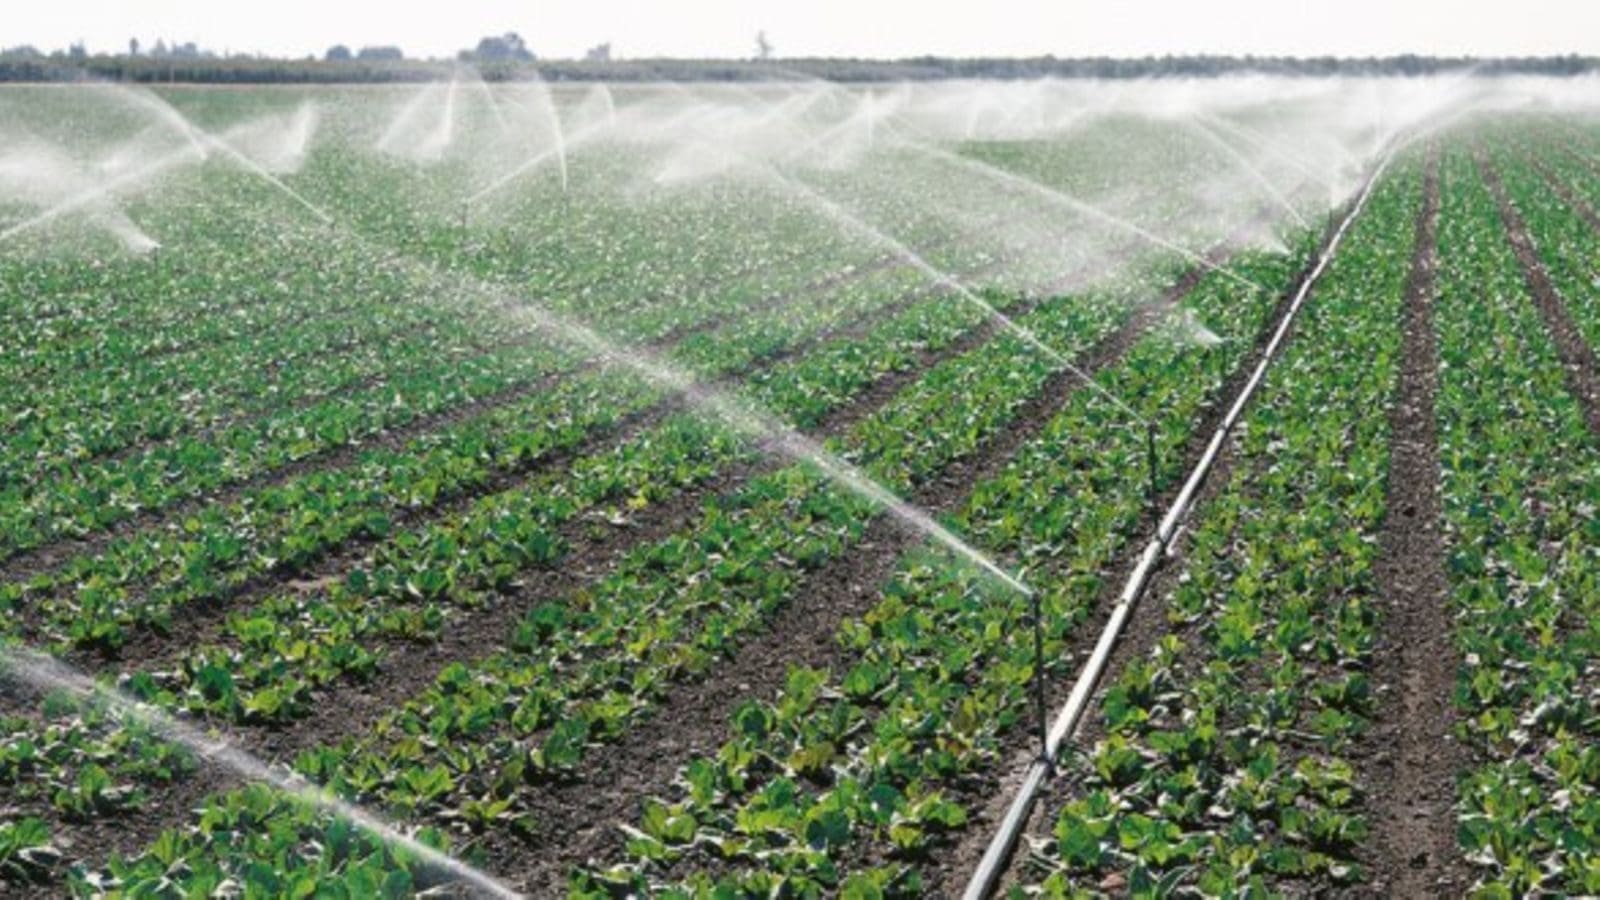 Tanzanian Agricultural Agency invests in irrigation infrastructure to expand capacity to produce improved seeds